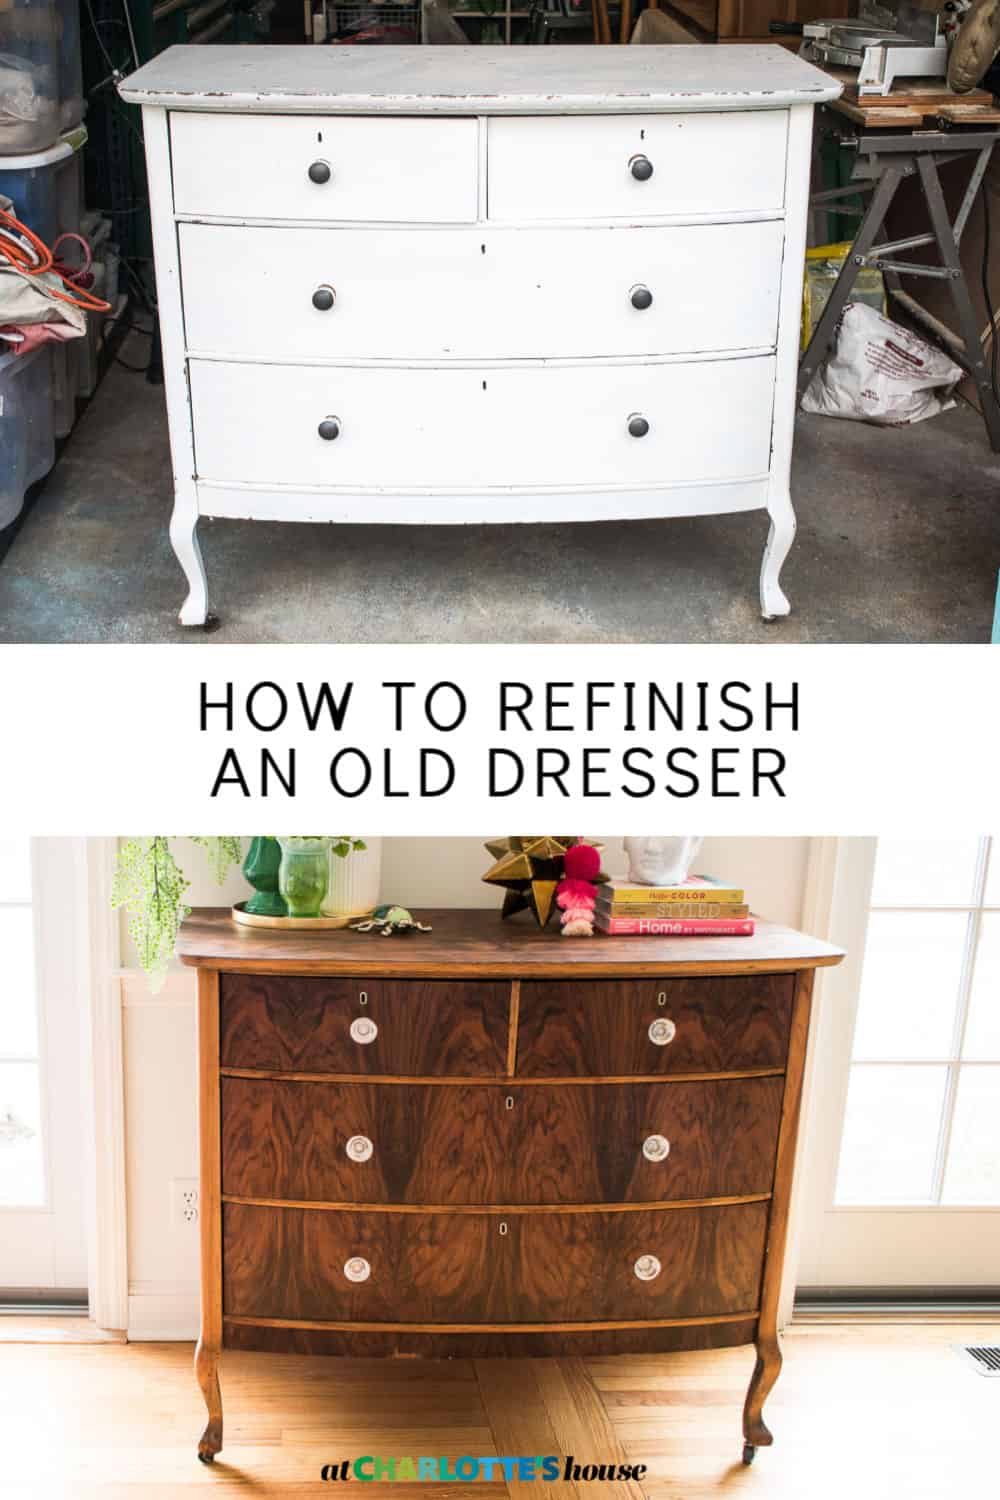 How To Refinish An Old Dresser At Charlotte S House